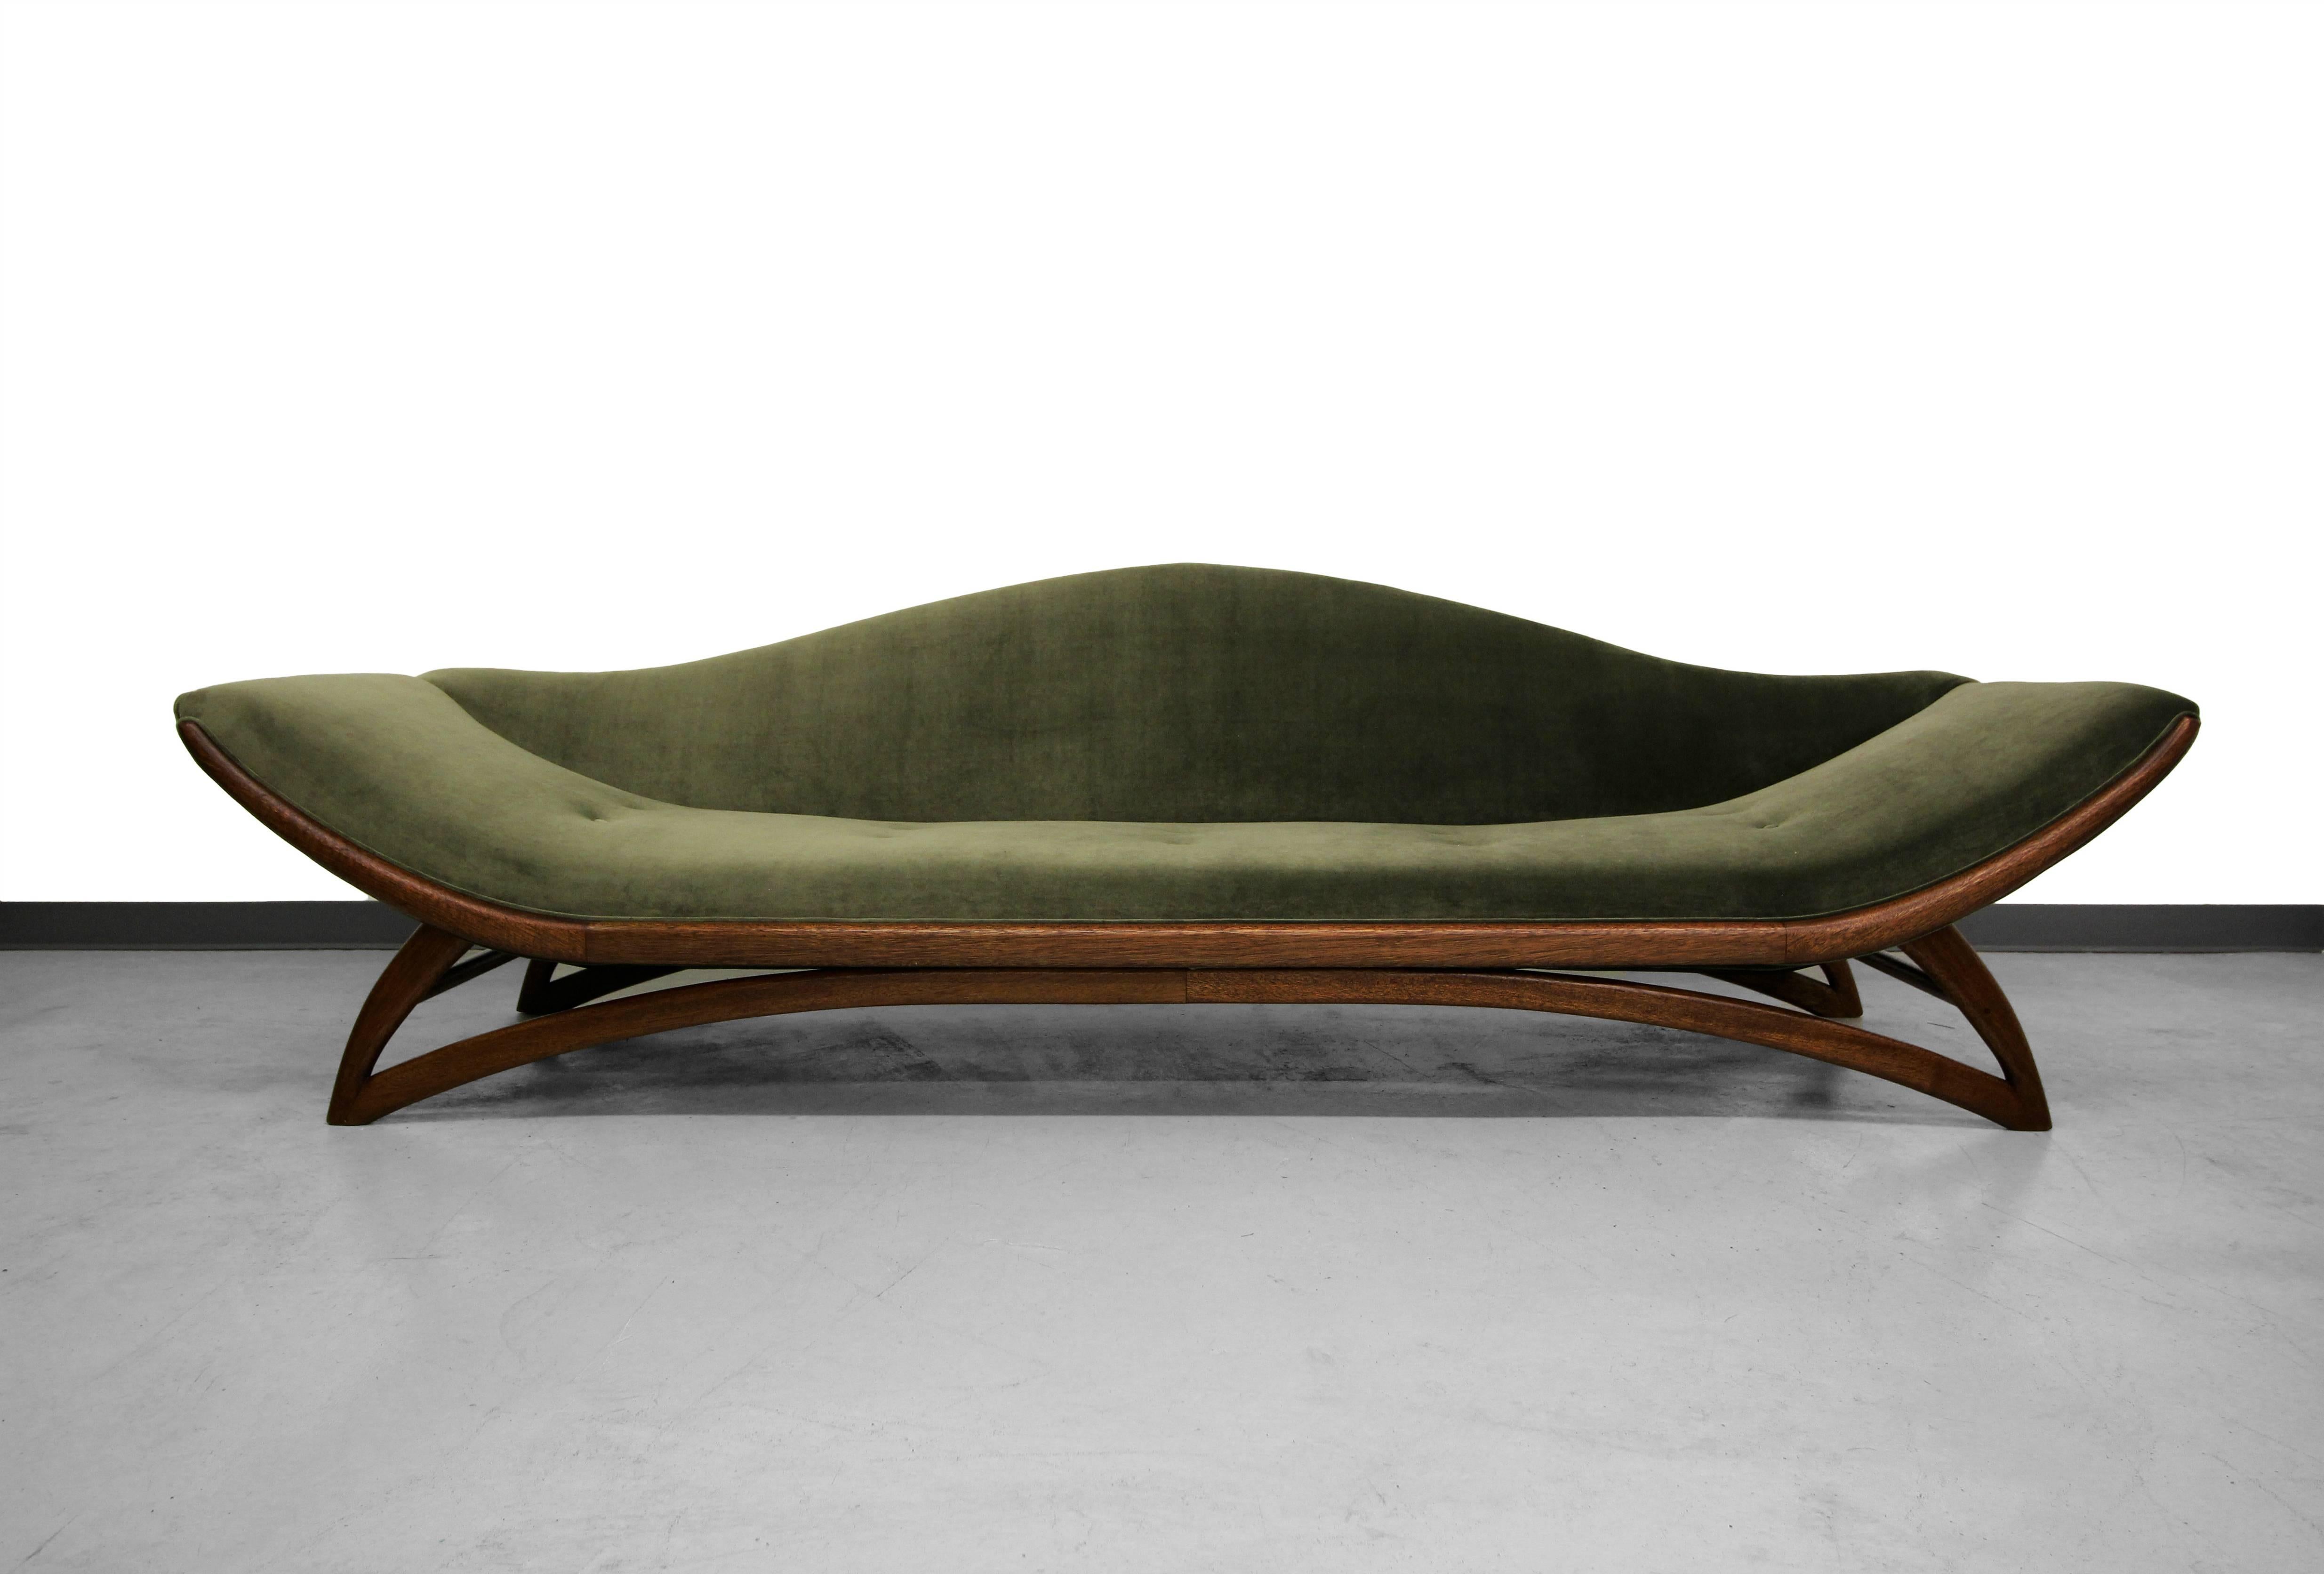 Absolutely stunning Mid-Century gondola sofa. Amazing lines and details make it a real show stopper. It measures 9ft in length and is supported by a perfectly sculpted walnut tone base. Expertly reupholstered in a gorgeous dark sage velvet with a